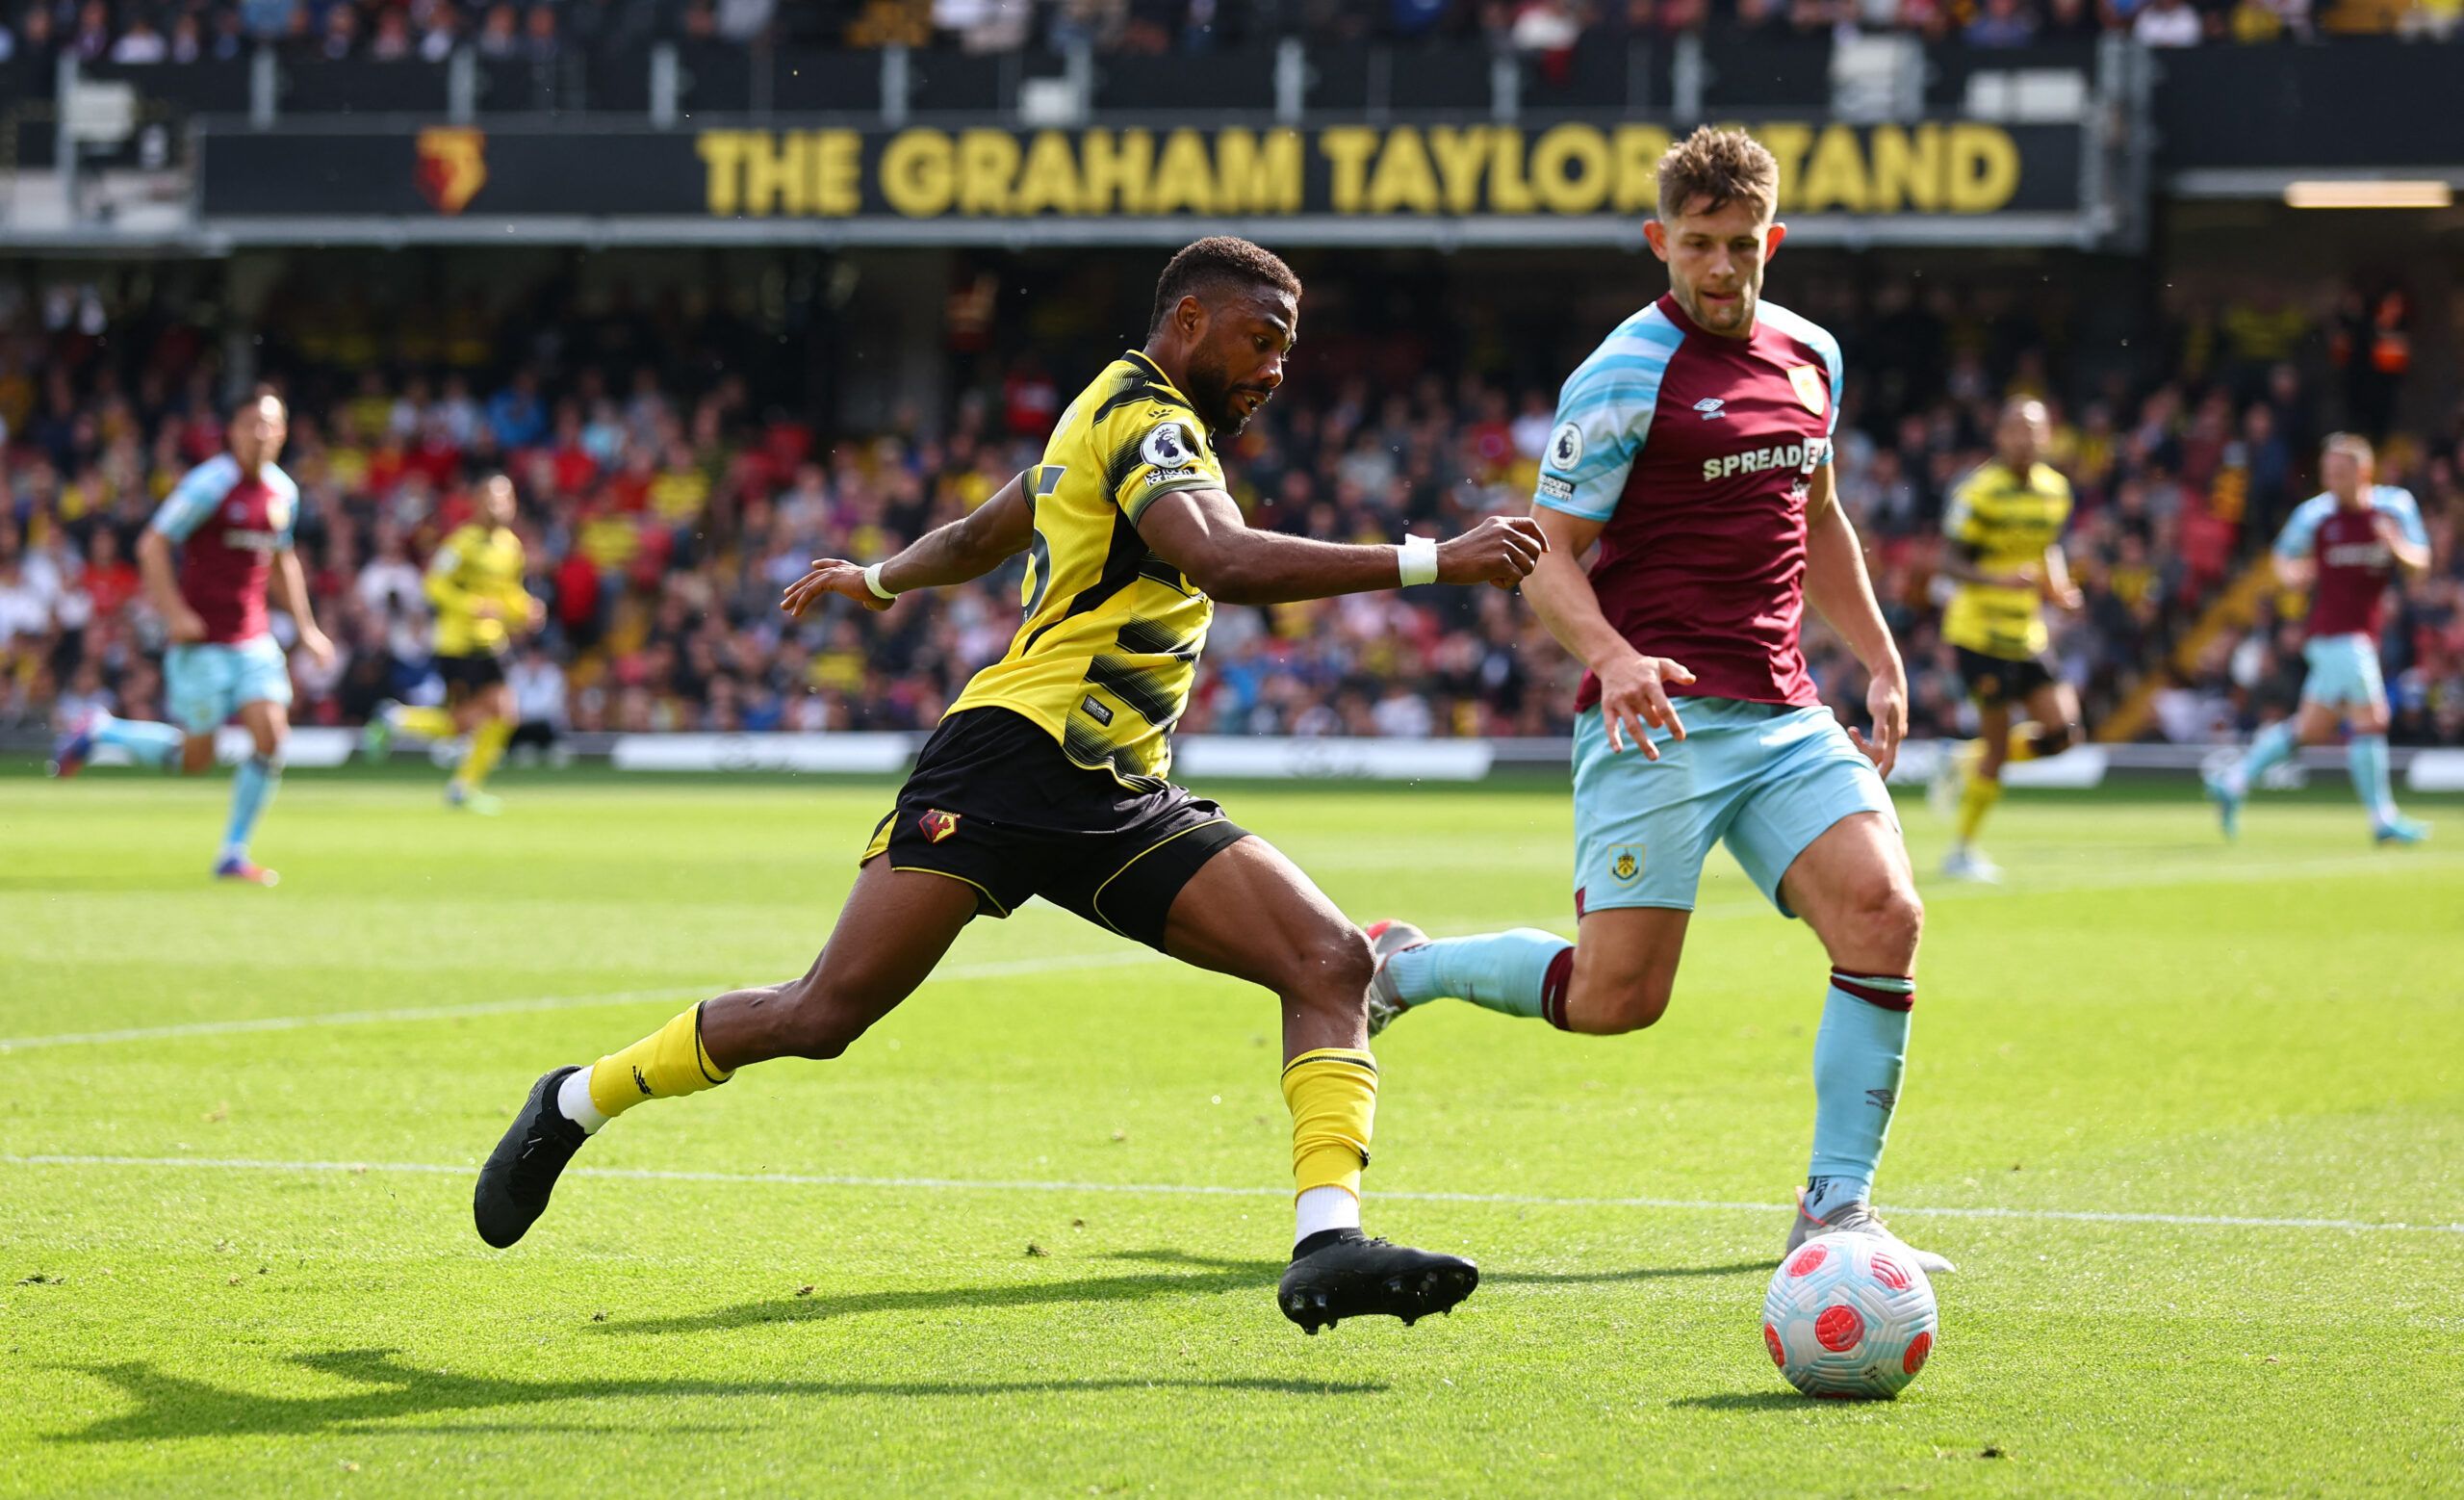 Soccer Football - Premier League - Watford v Burnley - Vicarage Road, Watford, Britain - April 30, 2022 Watford's Emmanuel Dennis in action with Burnley's James Tarkowski REUTERS/David Klein EDITORIAL USE ONLY. No use with unauthorized audio, video, data, fixture lists, club/league logos or 'live' services. Online in-match use limited to 75 images, no video emulation. No use in betting, games or single club /league/player publications.  Please contact your account representative for further deta